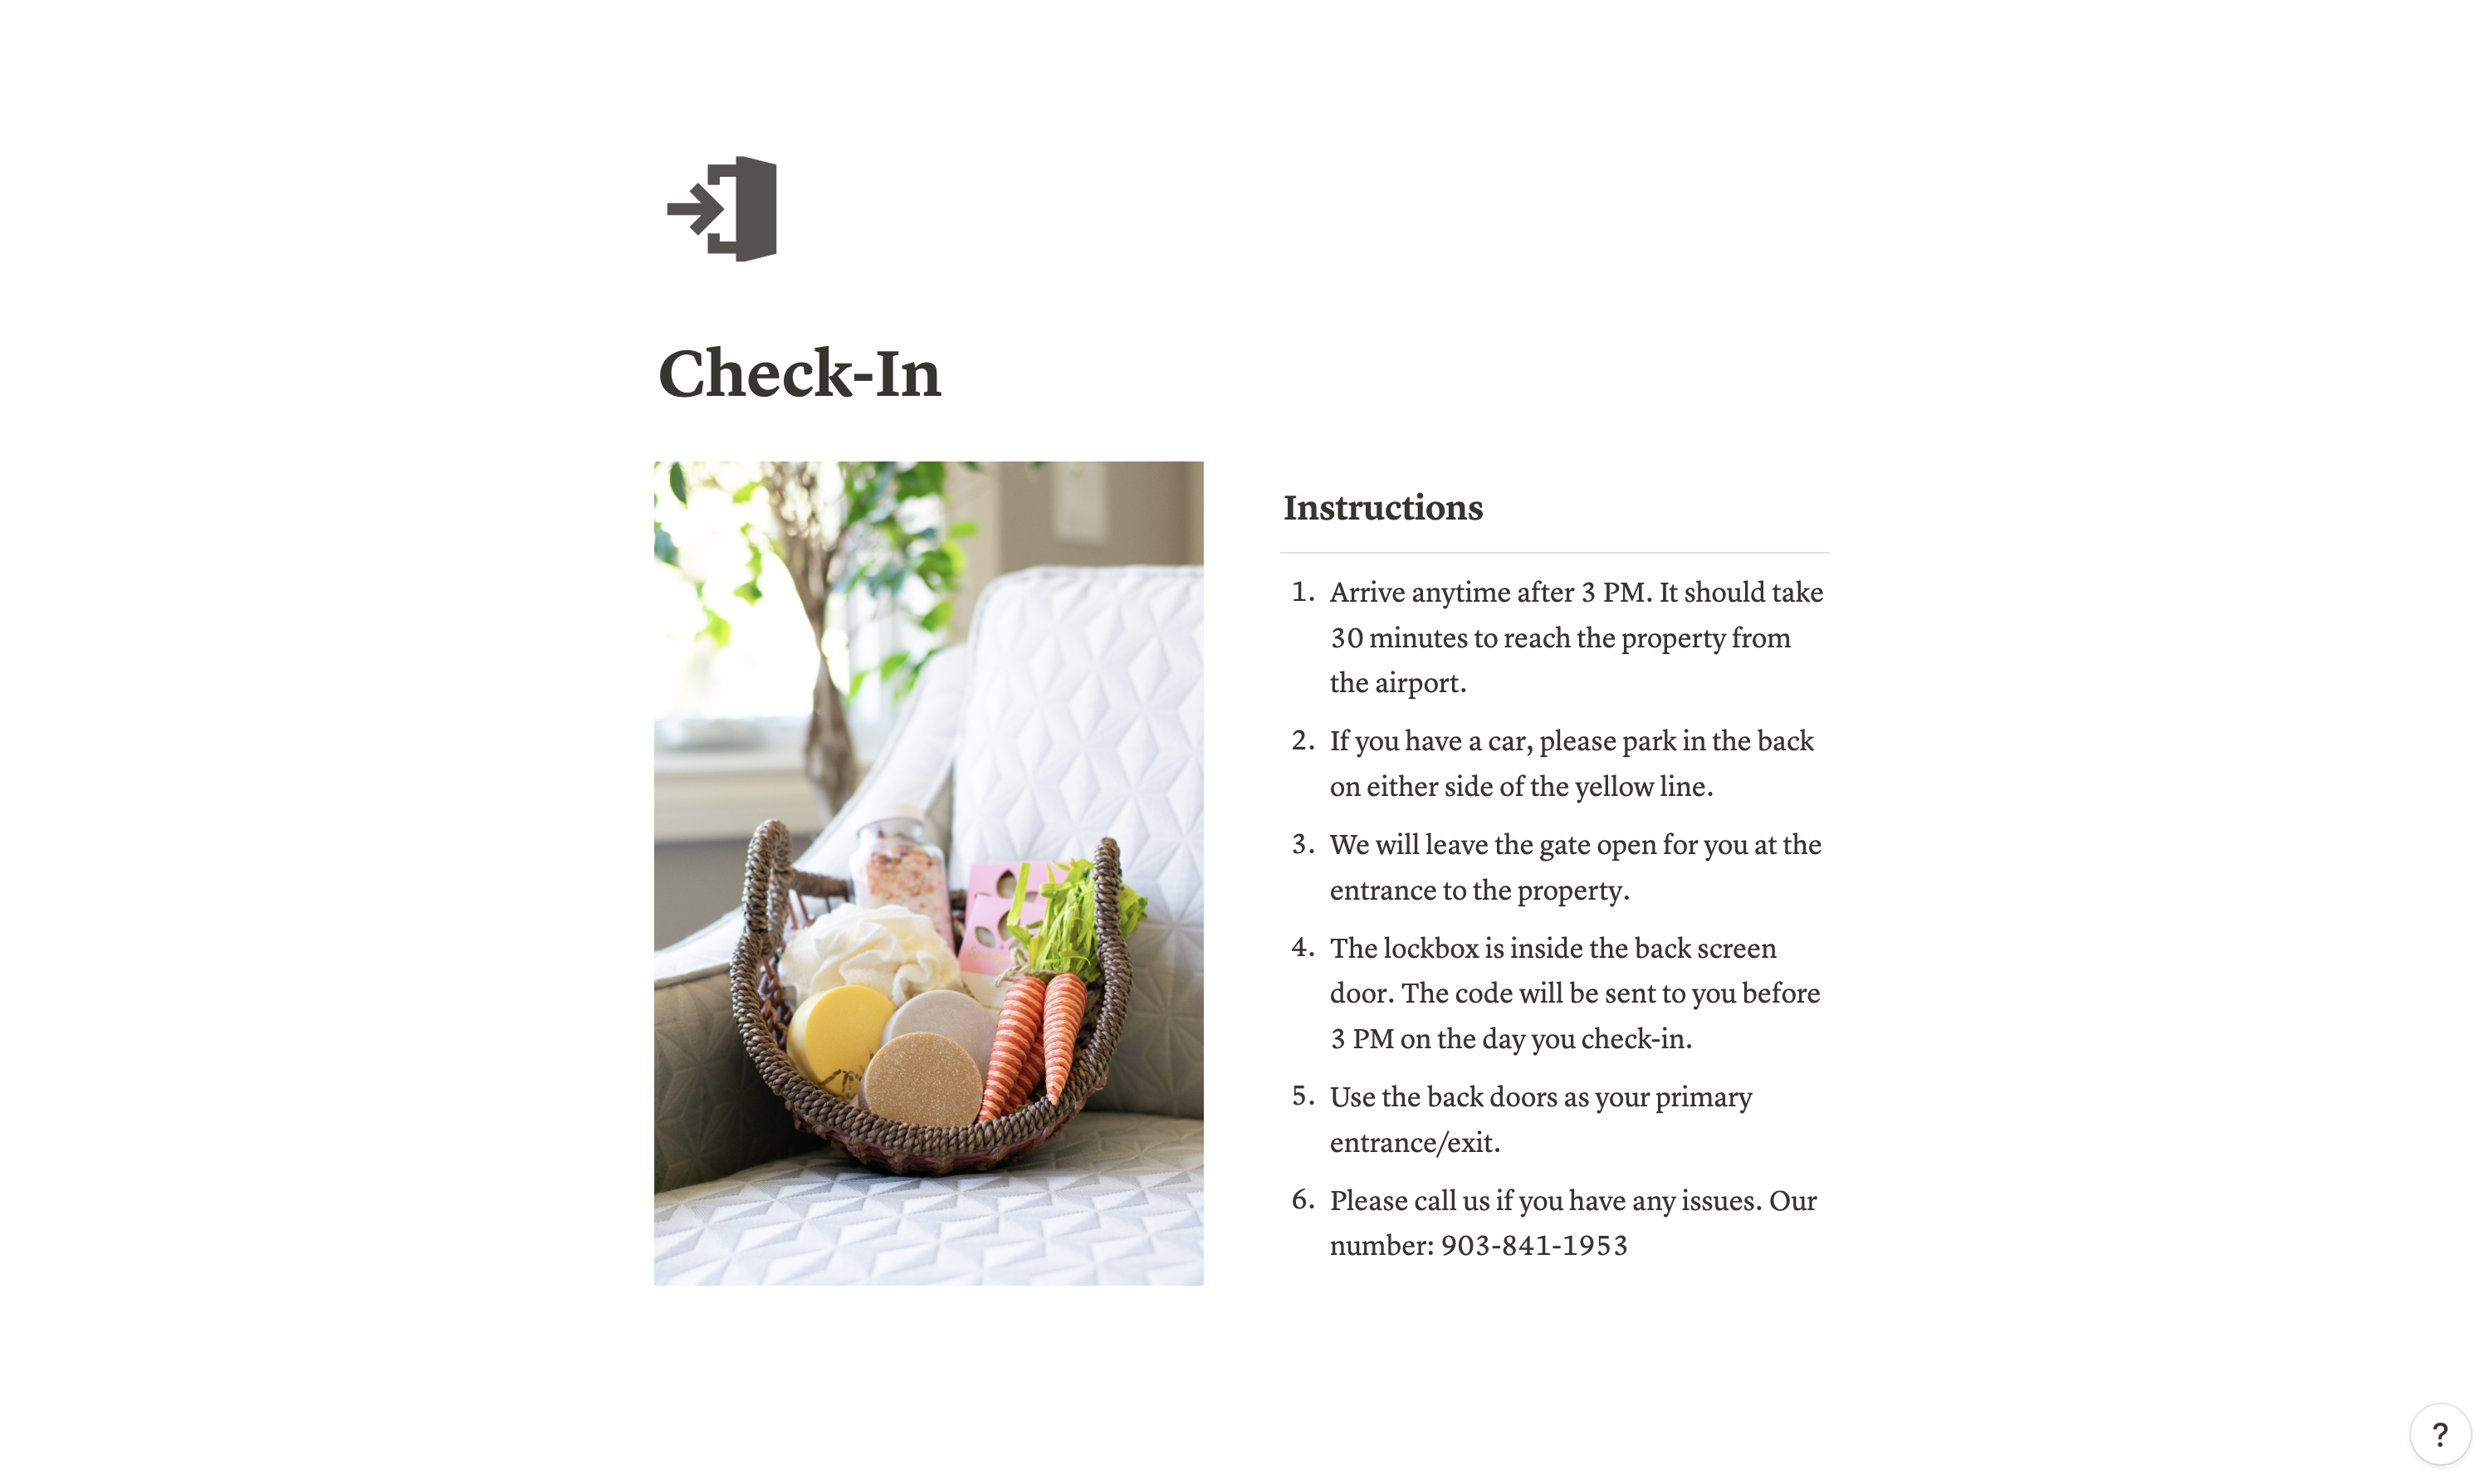 Give your Airbnb guests the most pleasant stay — Notion website guide to your home